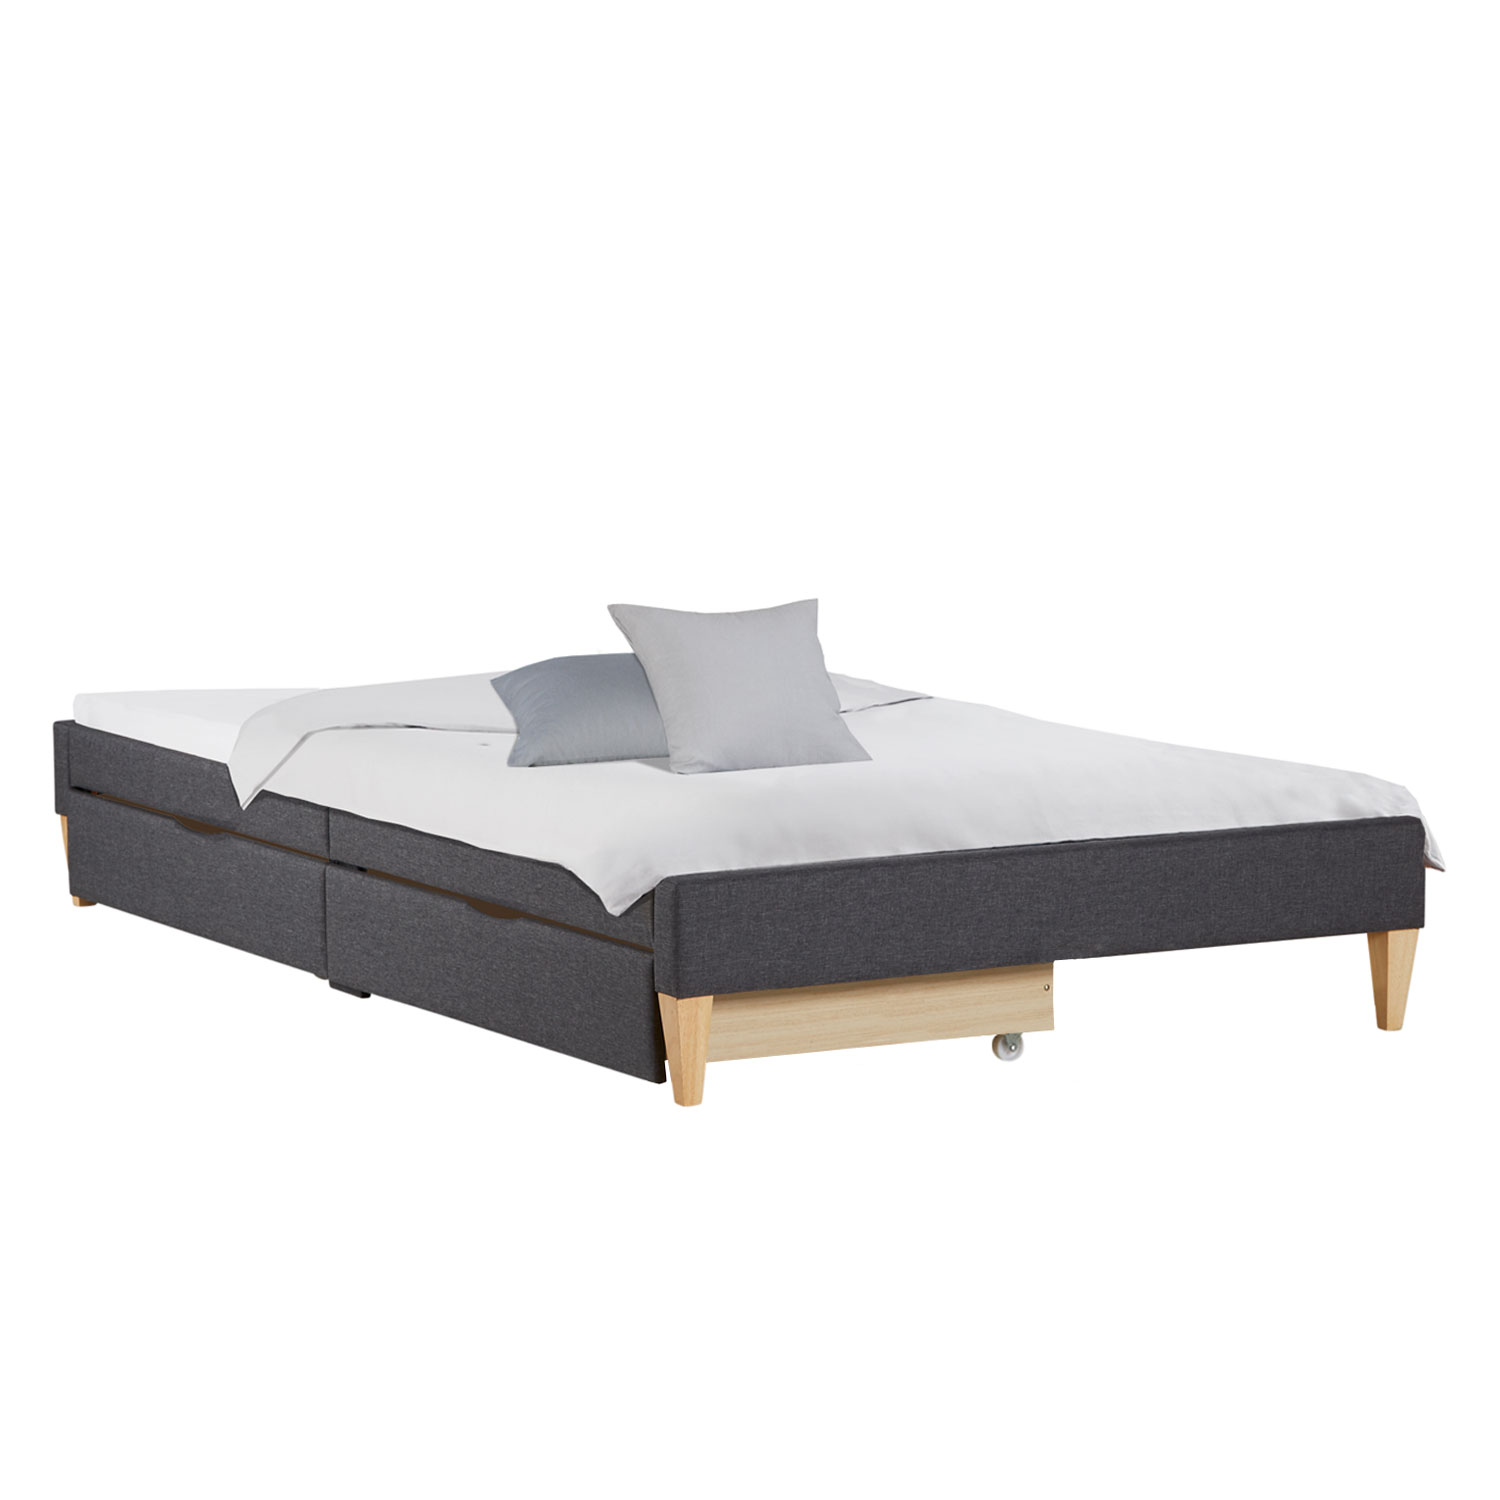 Upholstered Bed 90 140 x200 cm Slatts Grey Fabric Bed Single Bed Double Bed Futon Bed Frame Platform Bed Mattress 2 Drawers